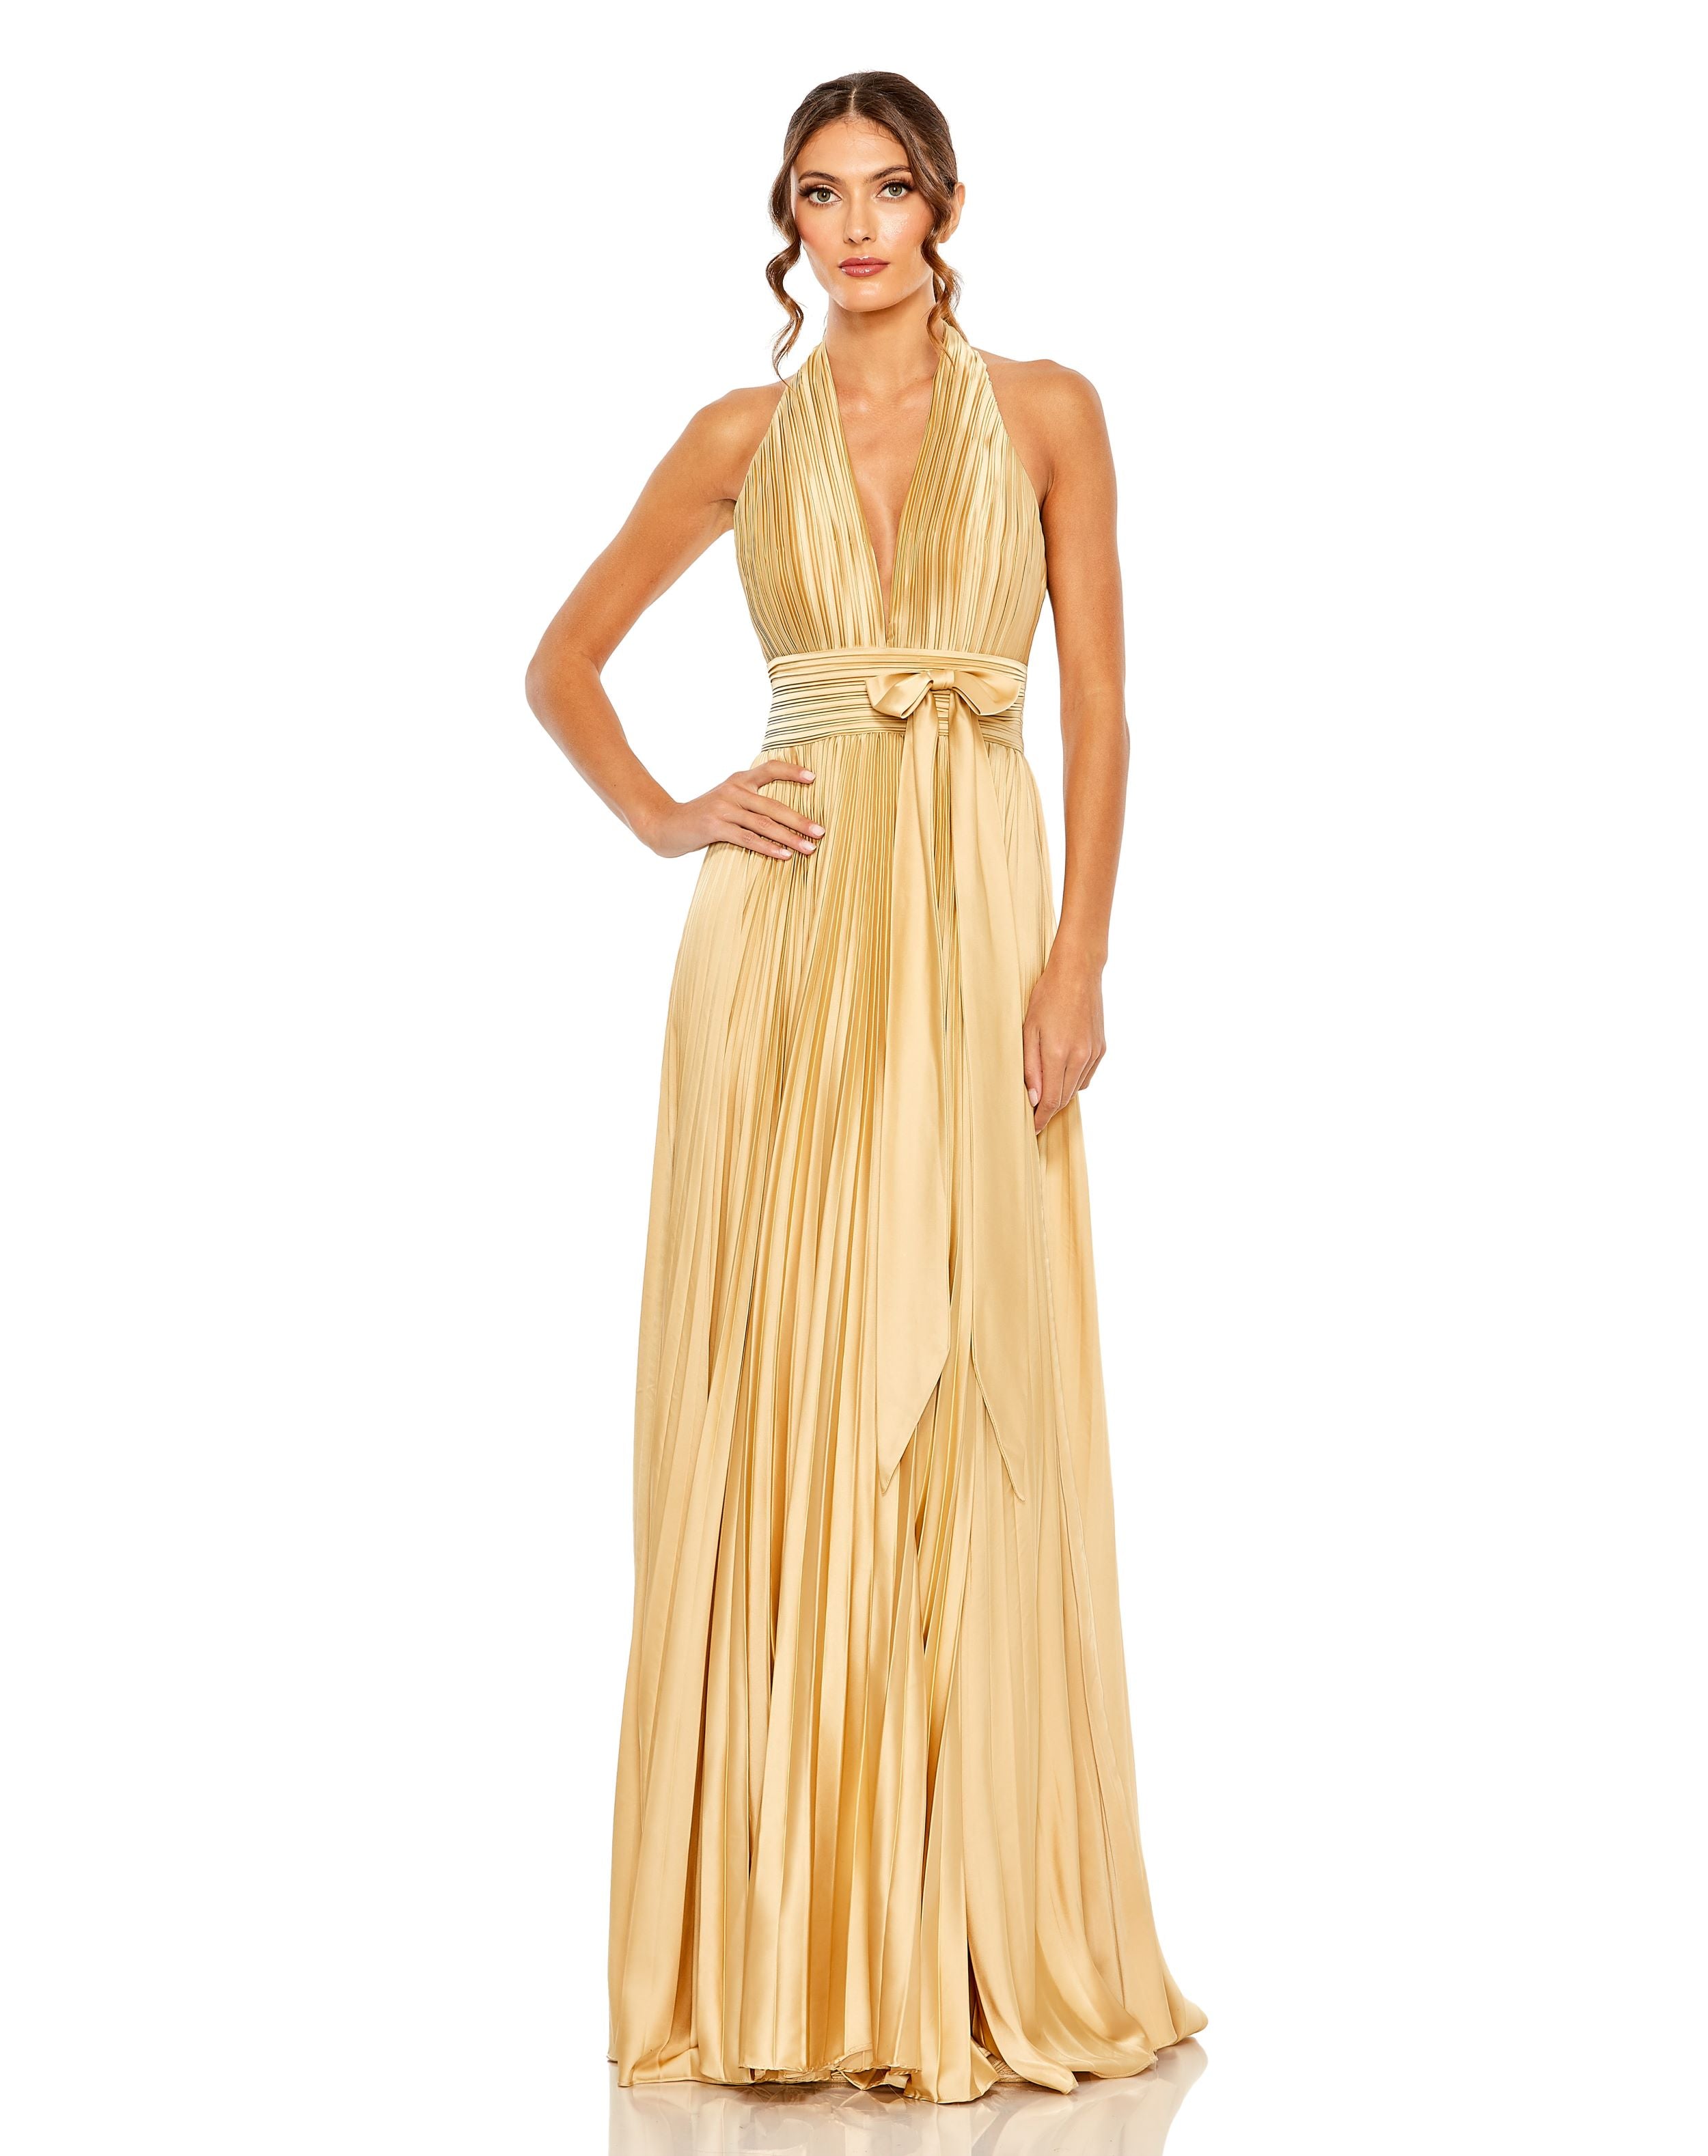 Pleated Halter Neck Gown with Center Bow